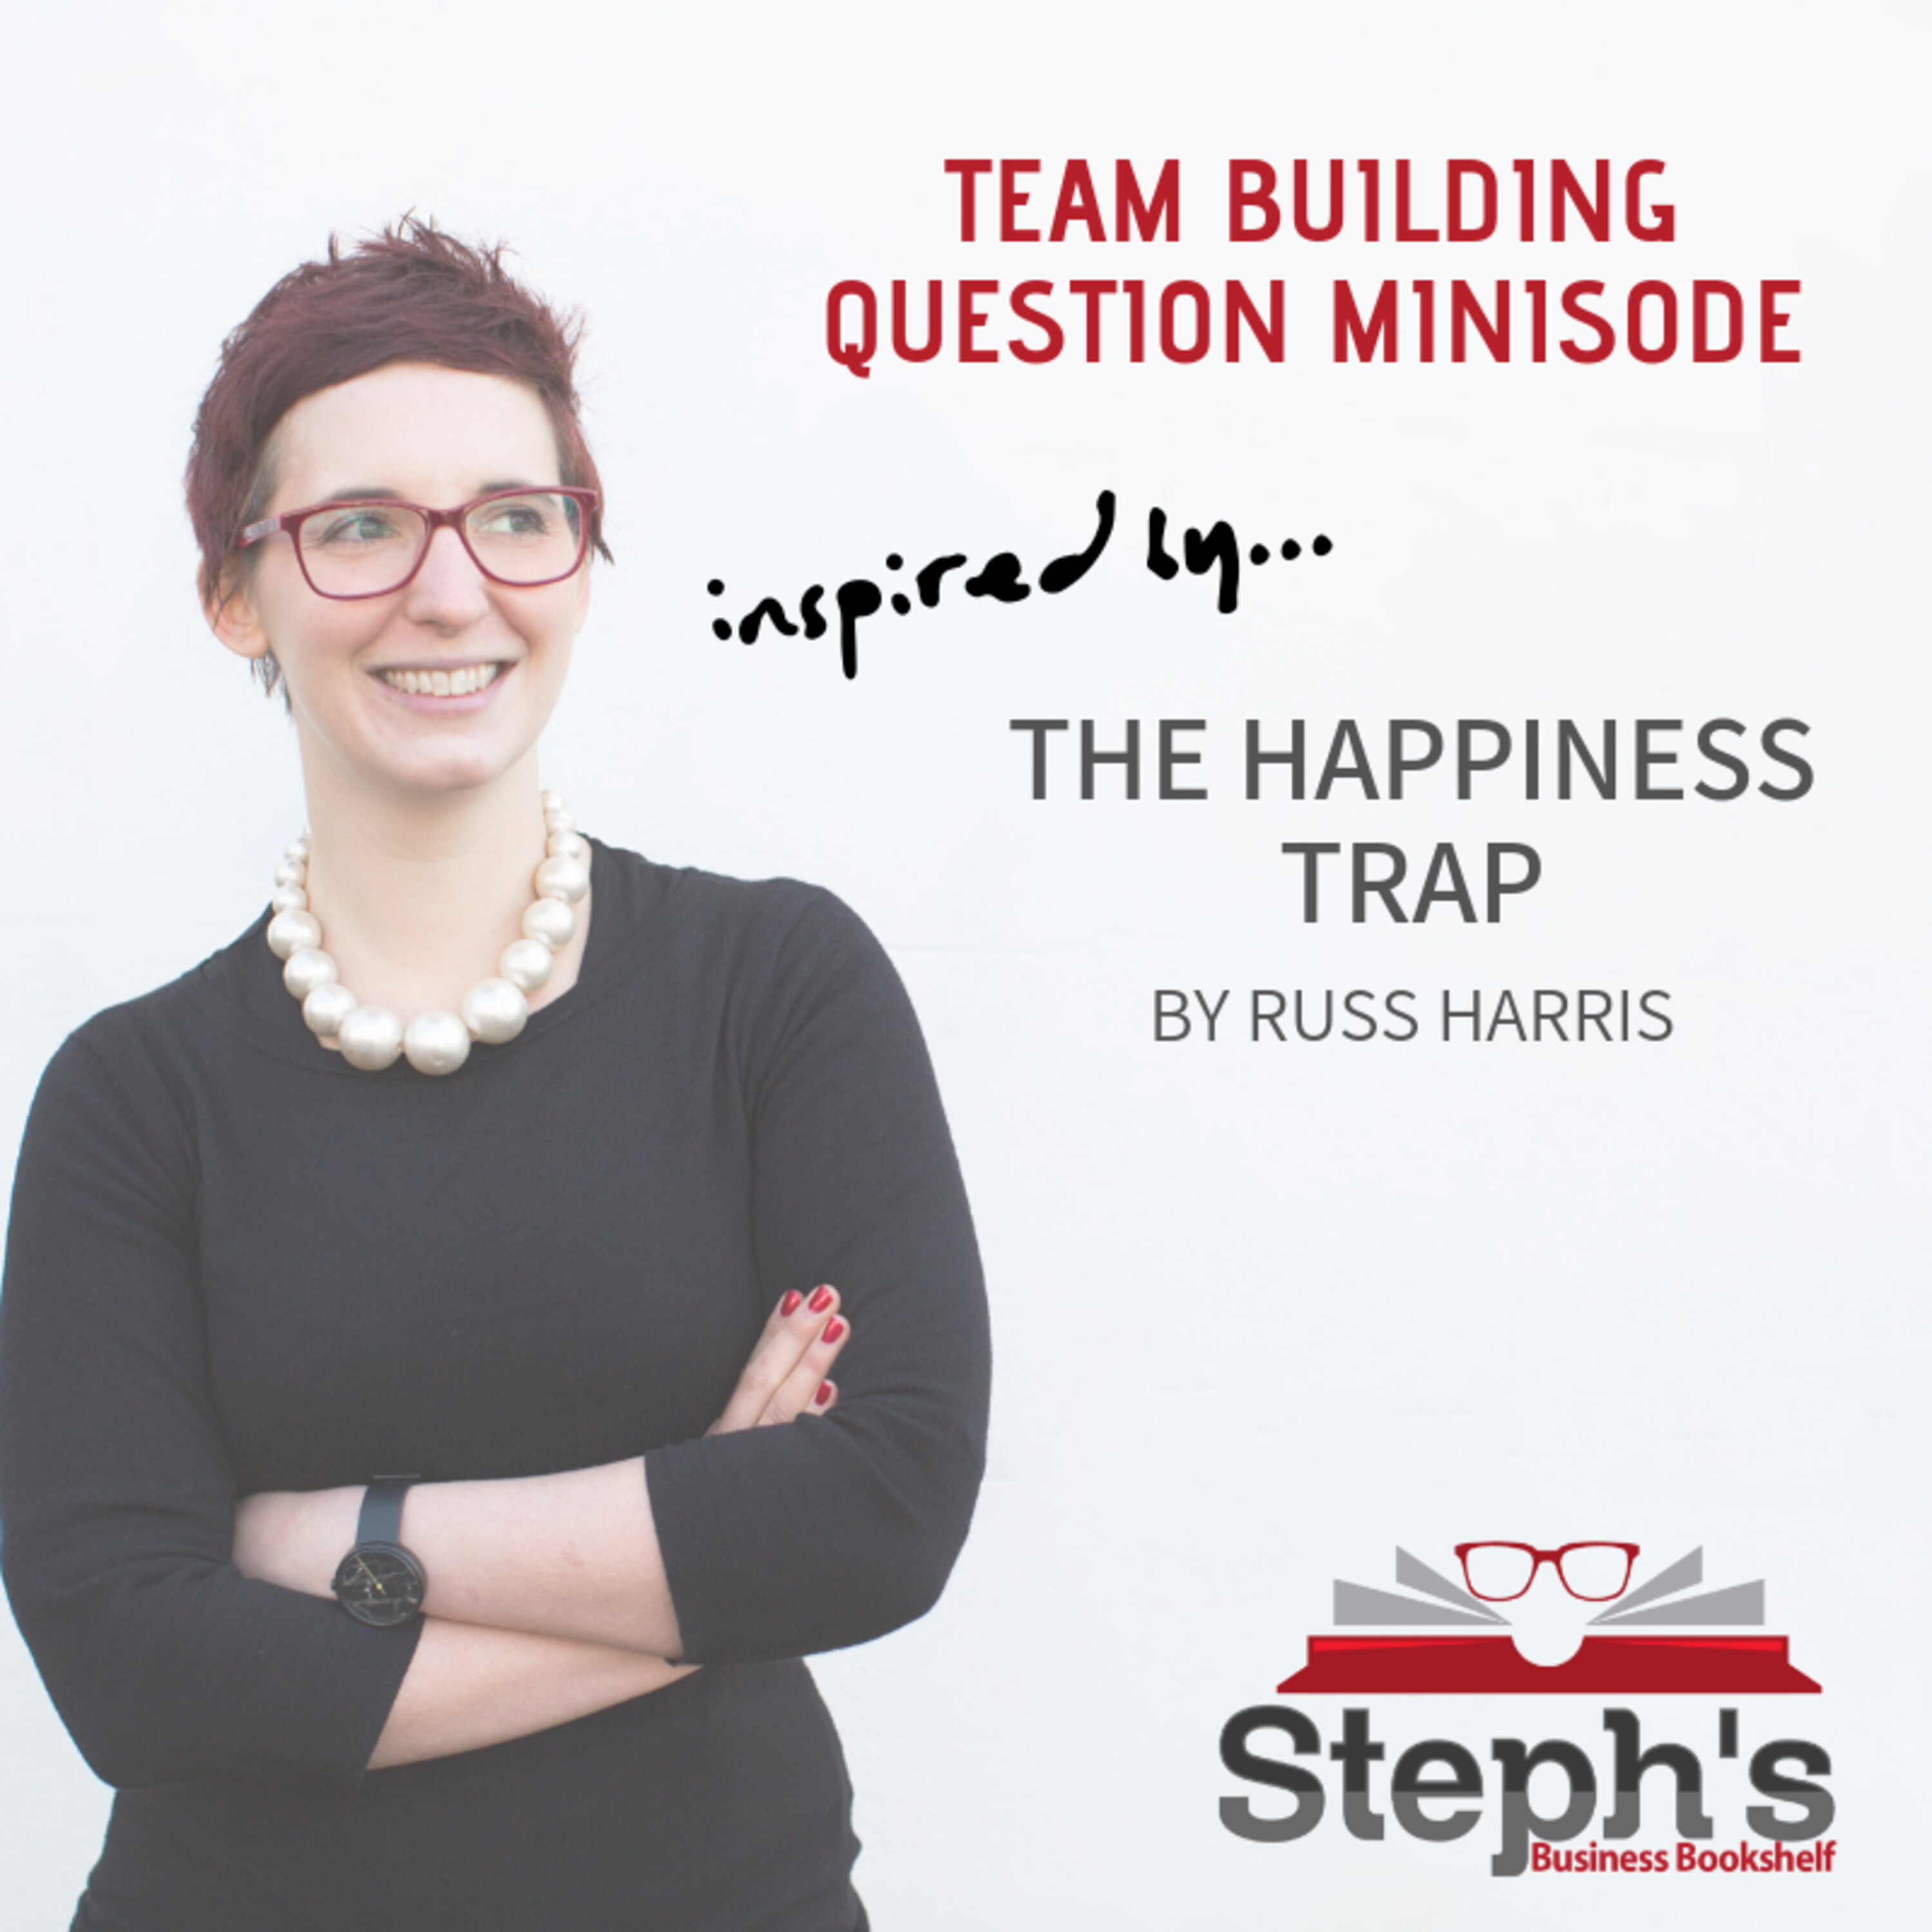 The Happiness Trap: Team Building Question Image